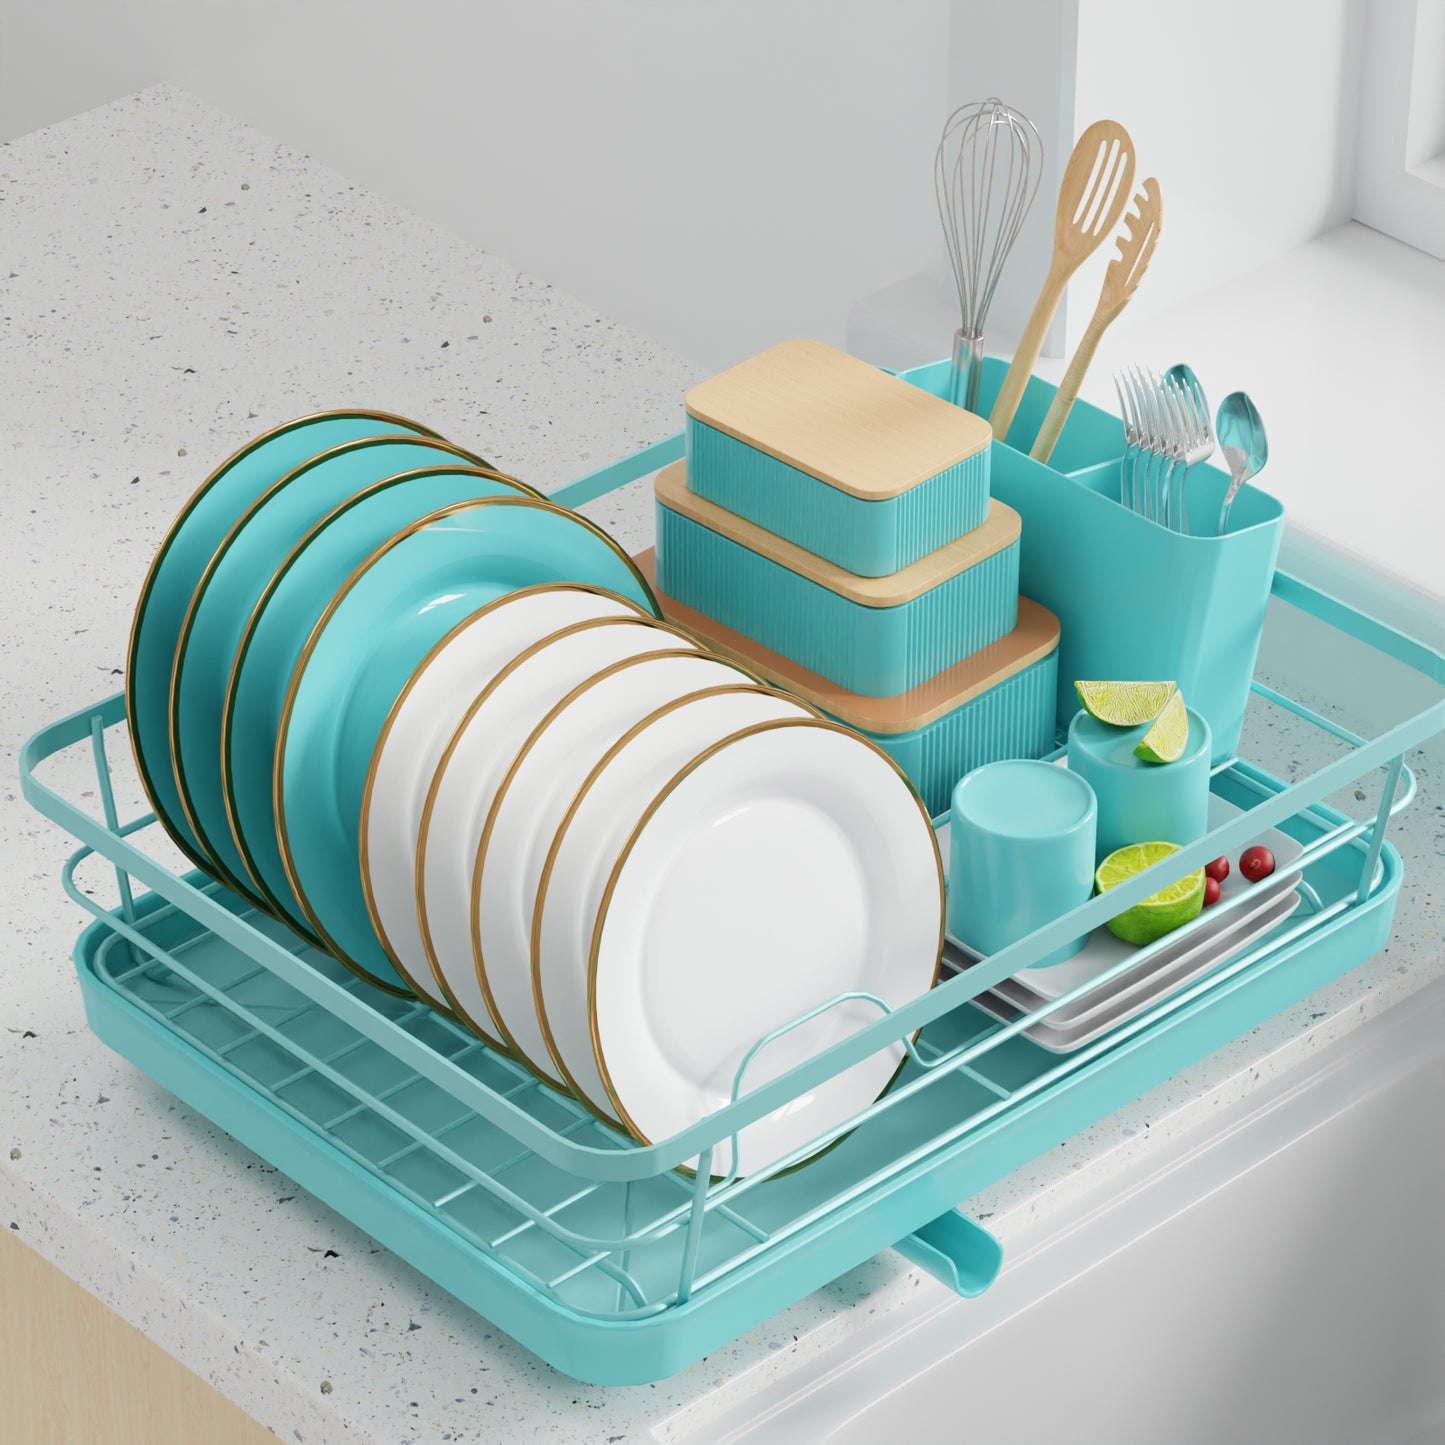  Sakugi Dish Drying Rack- 2-Layer Stainless Steel Dish Rack and  Drainboard Set with Drainage,ZZLJ5